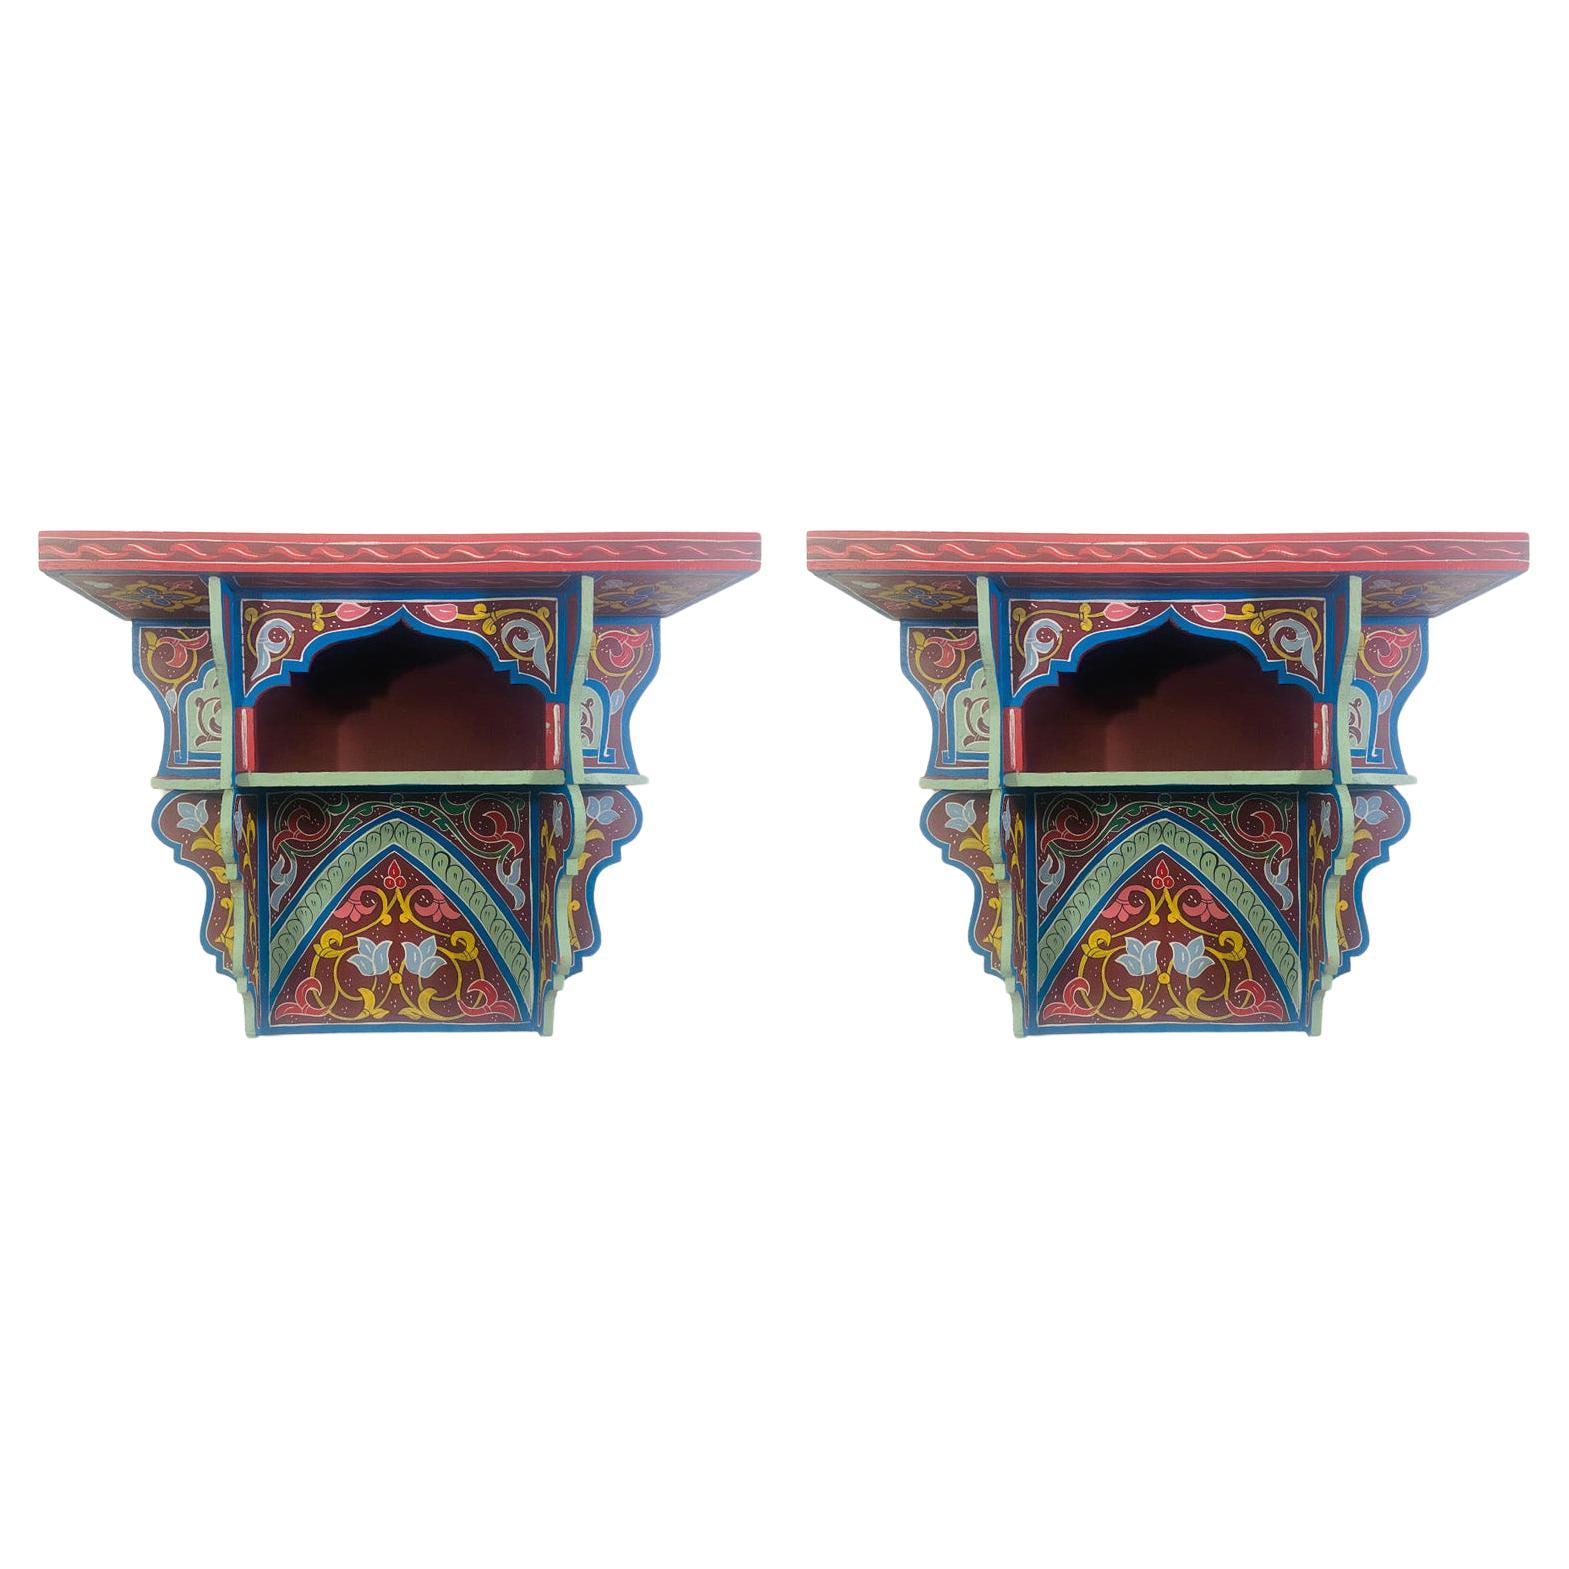 Vintage Blue Boho Chic Moroccan Spice Shelf or Rack , a Pair For Sale